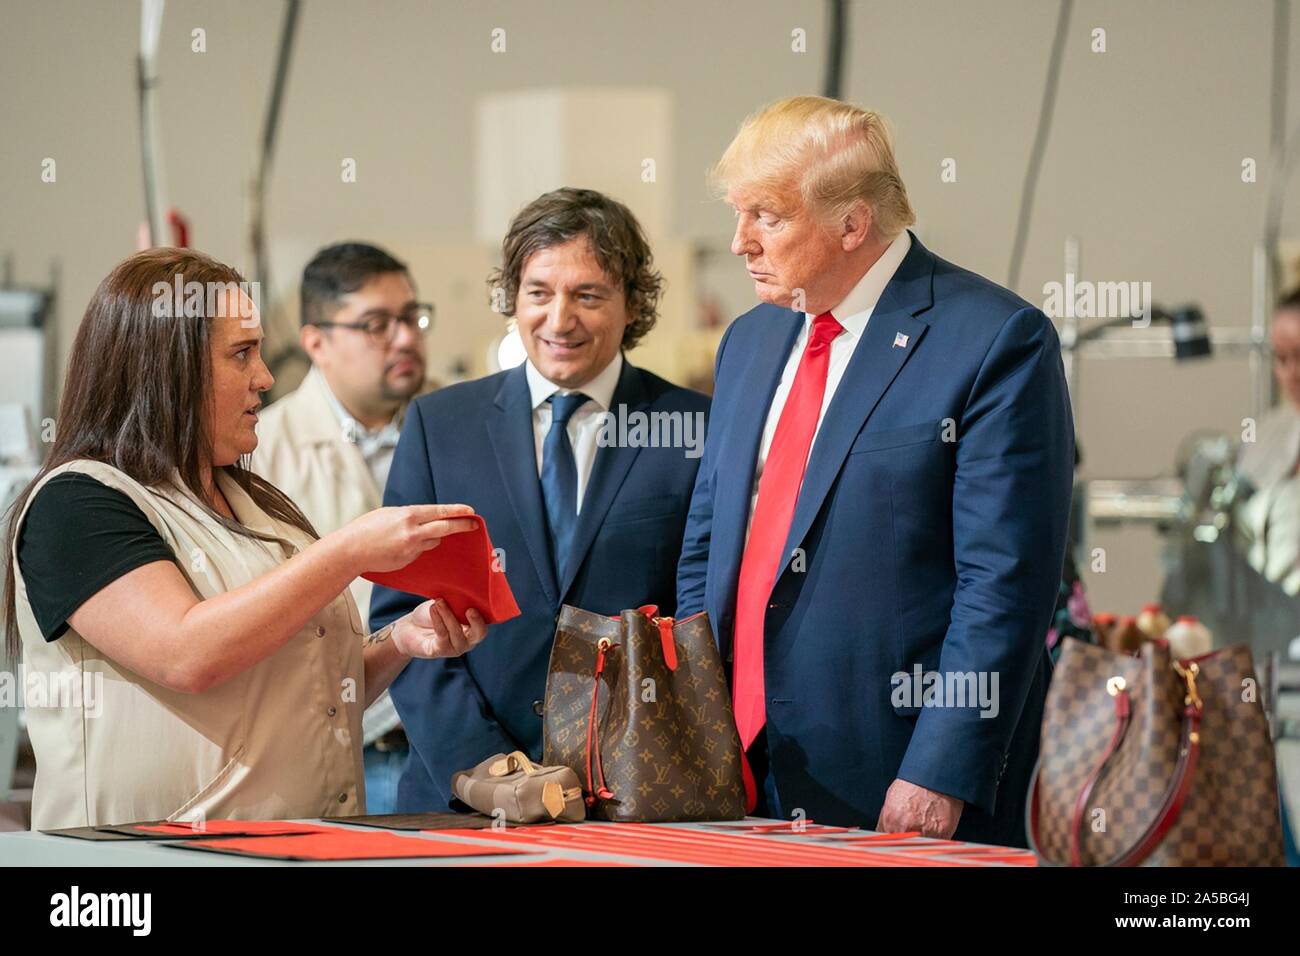 U.S President Donald Trump tours the newly opened Louis Vuitton Workshop  Rochambeau October 17, 2019 in Alvarado, Texas. Joining the president from  left to right are: Carlos Sousa, the general manager of